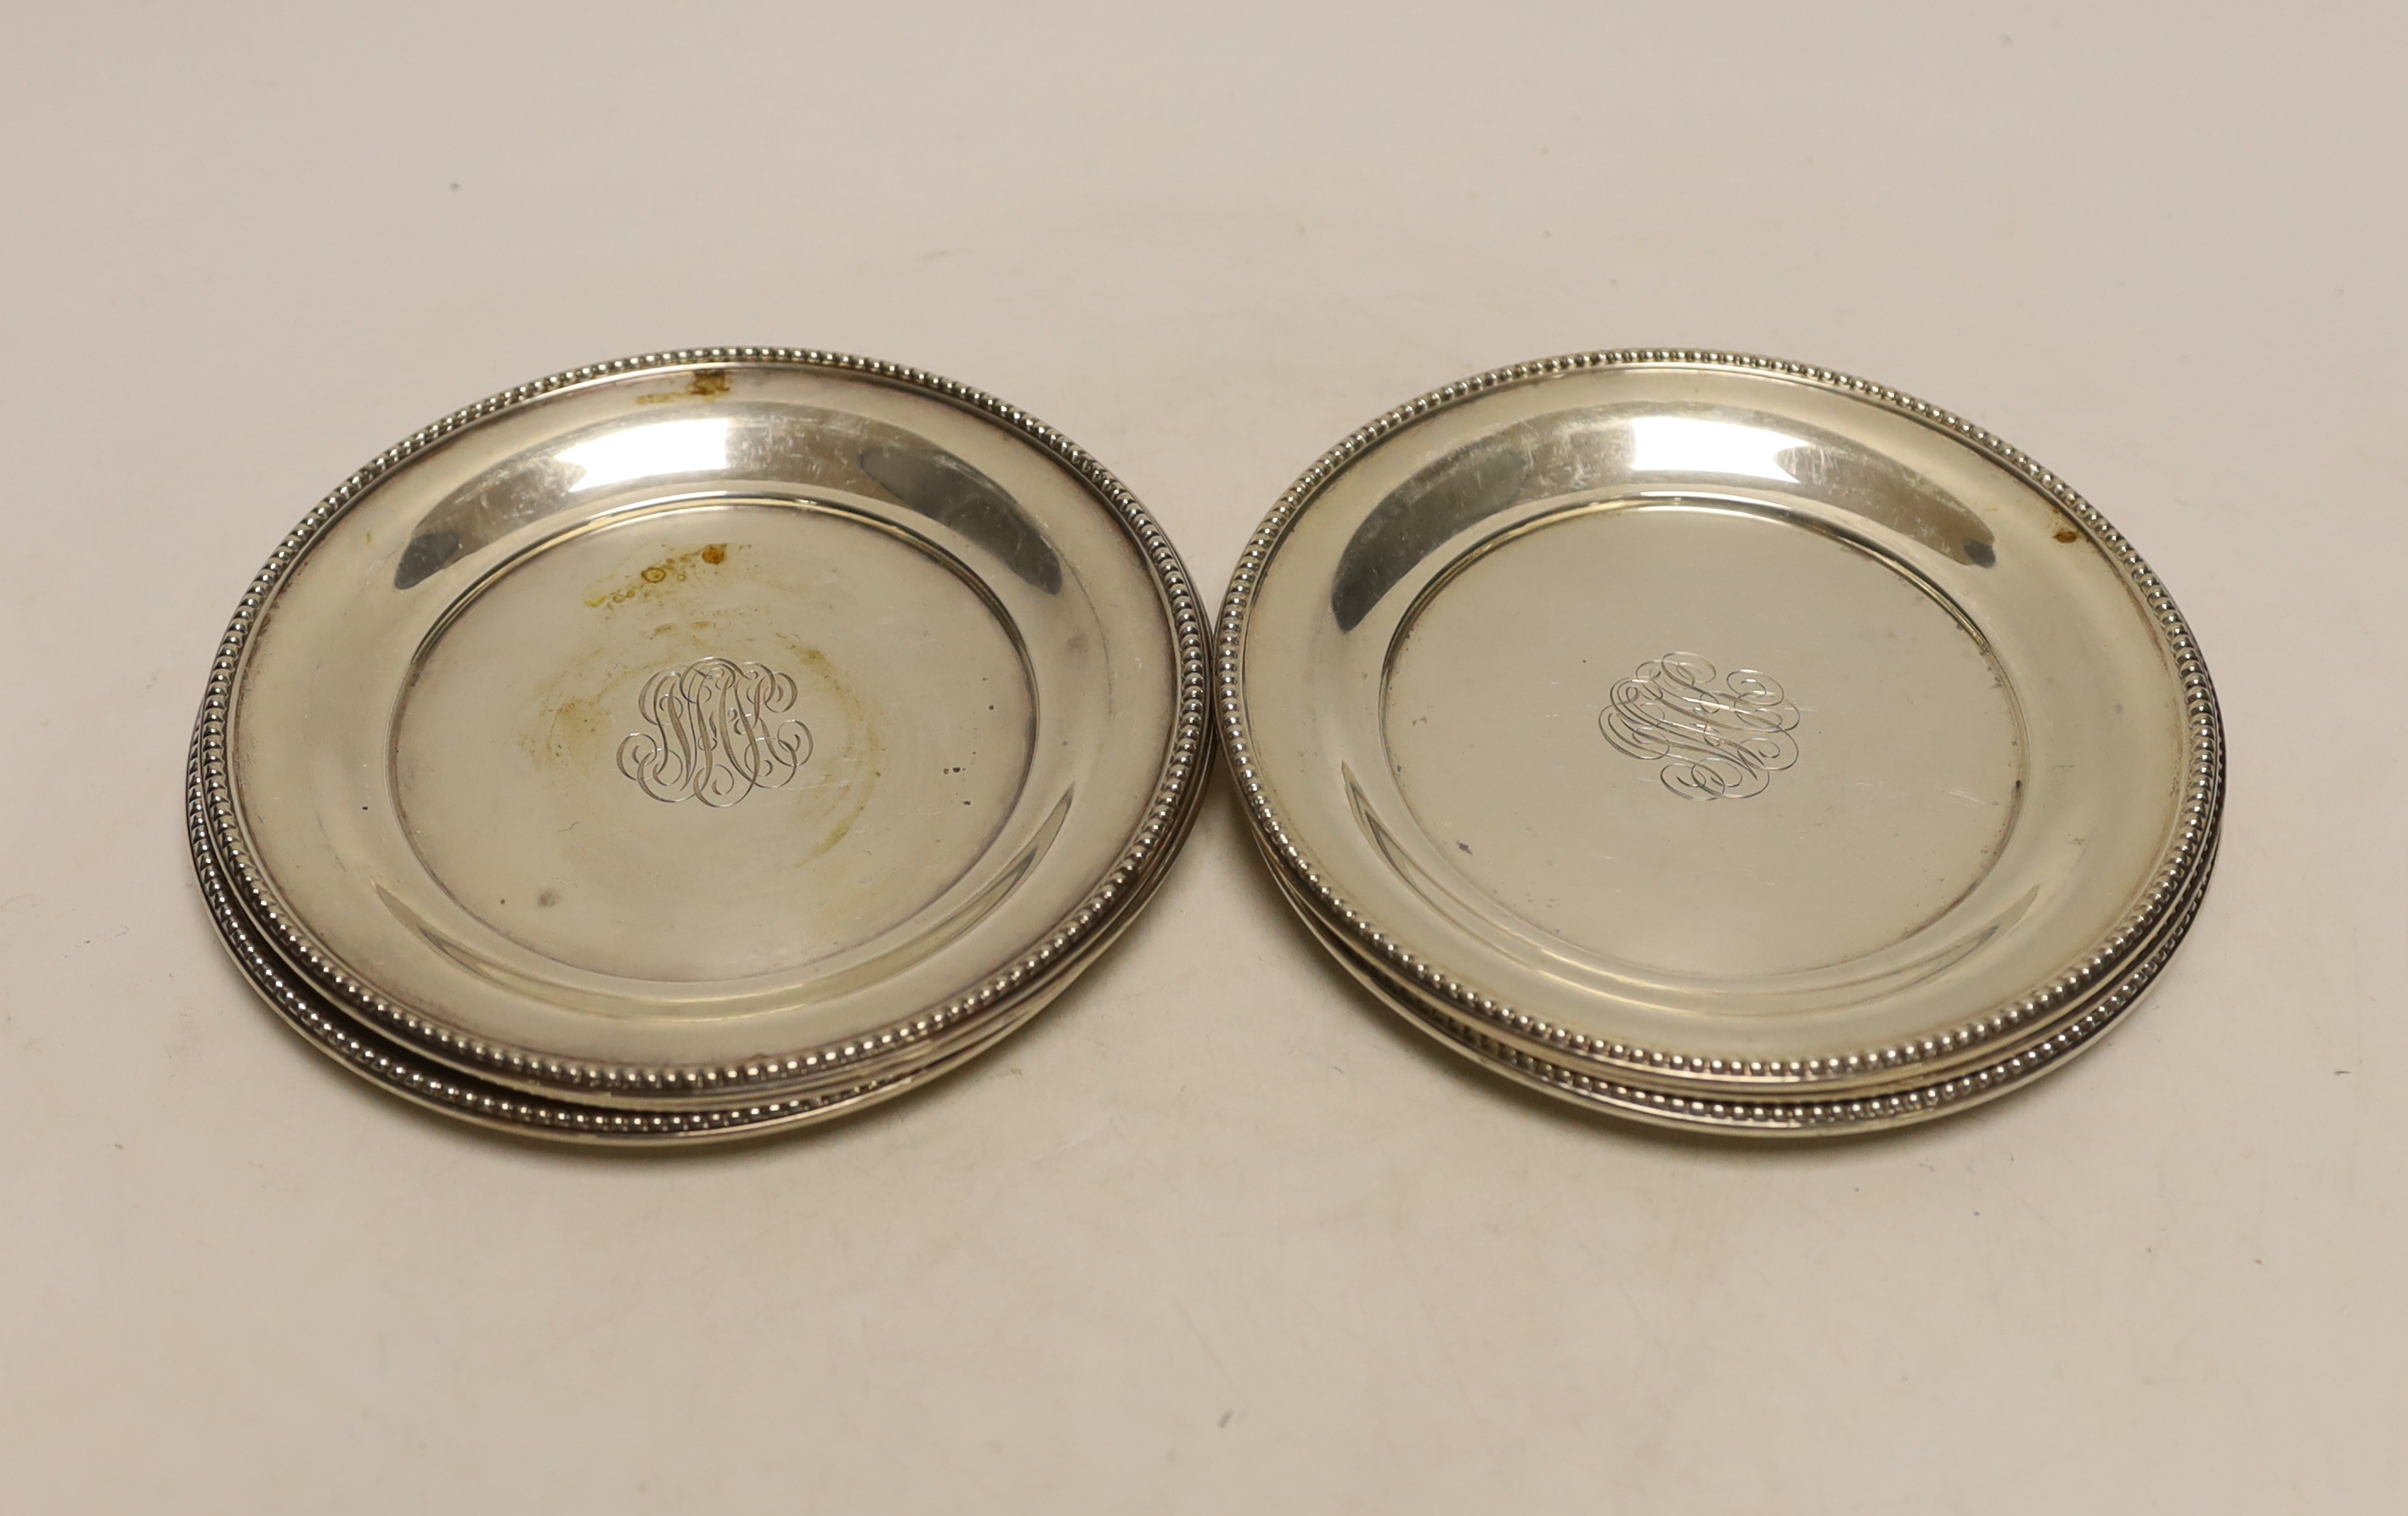 A set of six American sterling dishes, by R. Wallace & Sons, with engraved monogram and beaded borders, 15.1cm, 18.8oz.